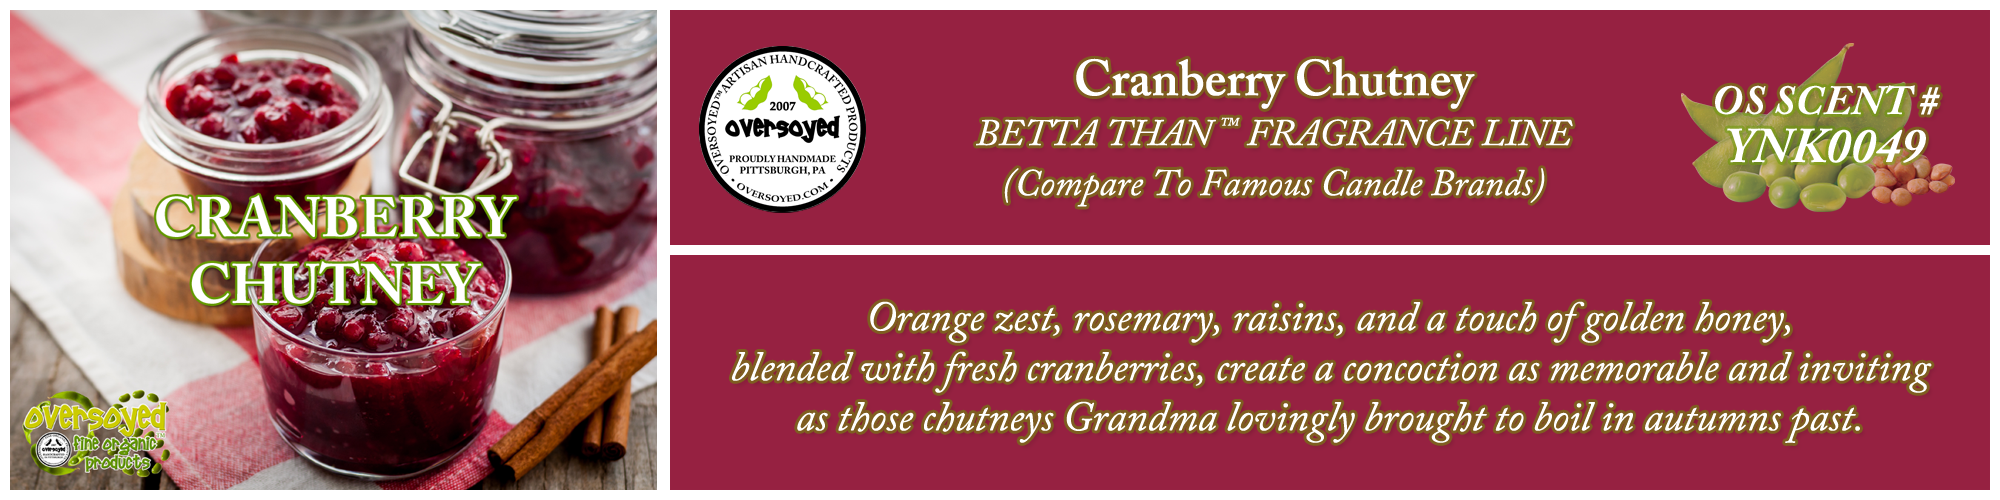 Cranberry Chutney Handcrafted Products Collection